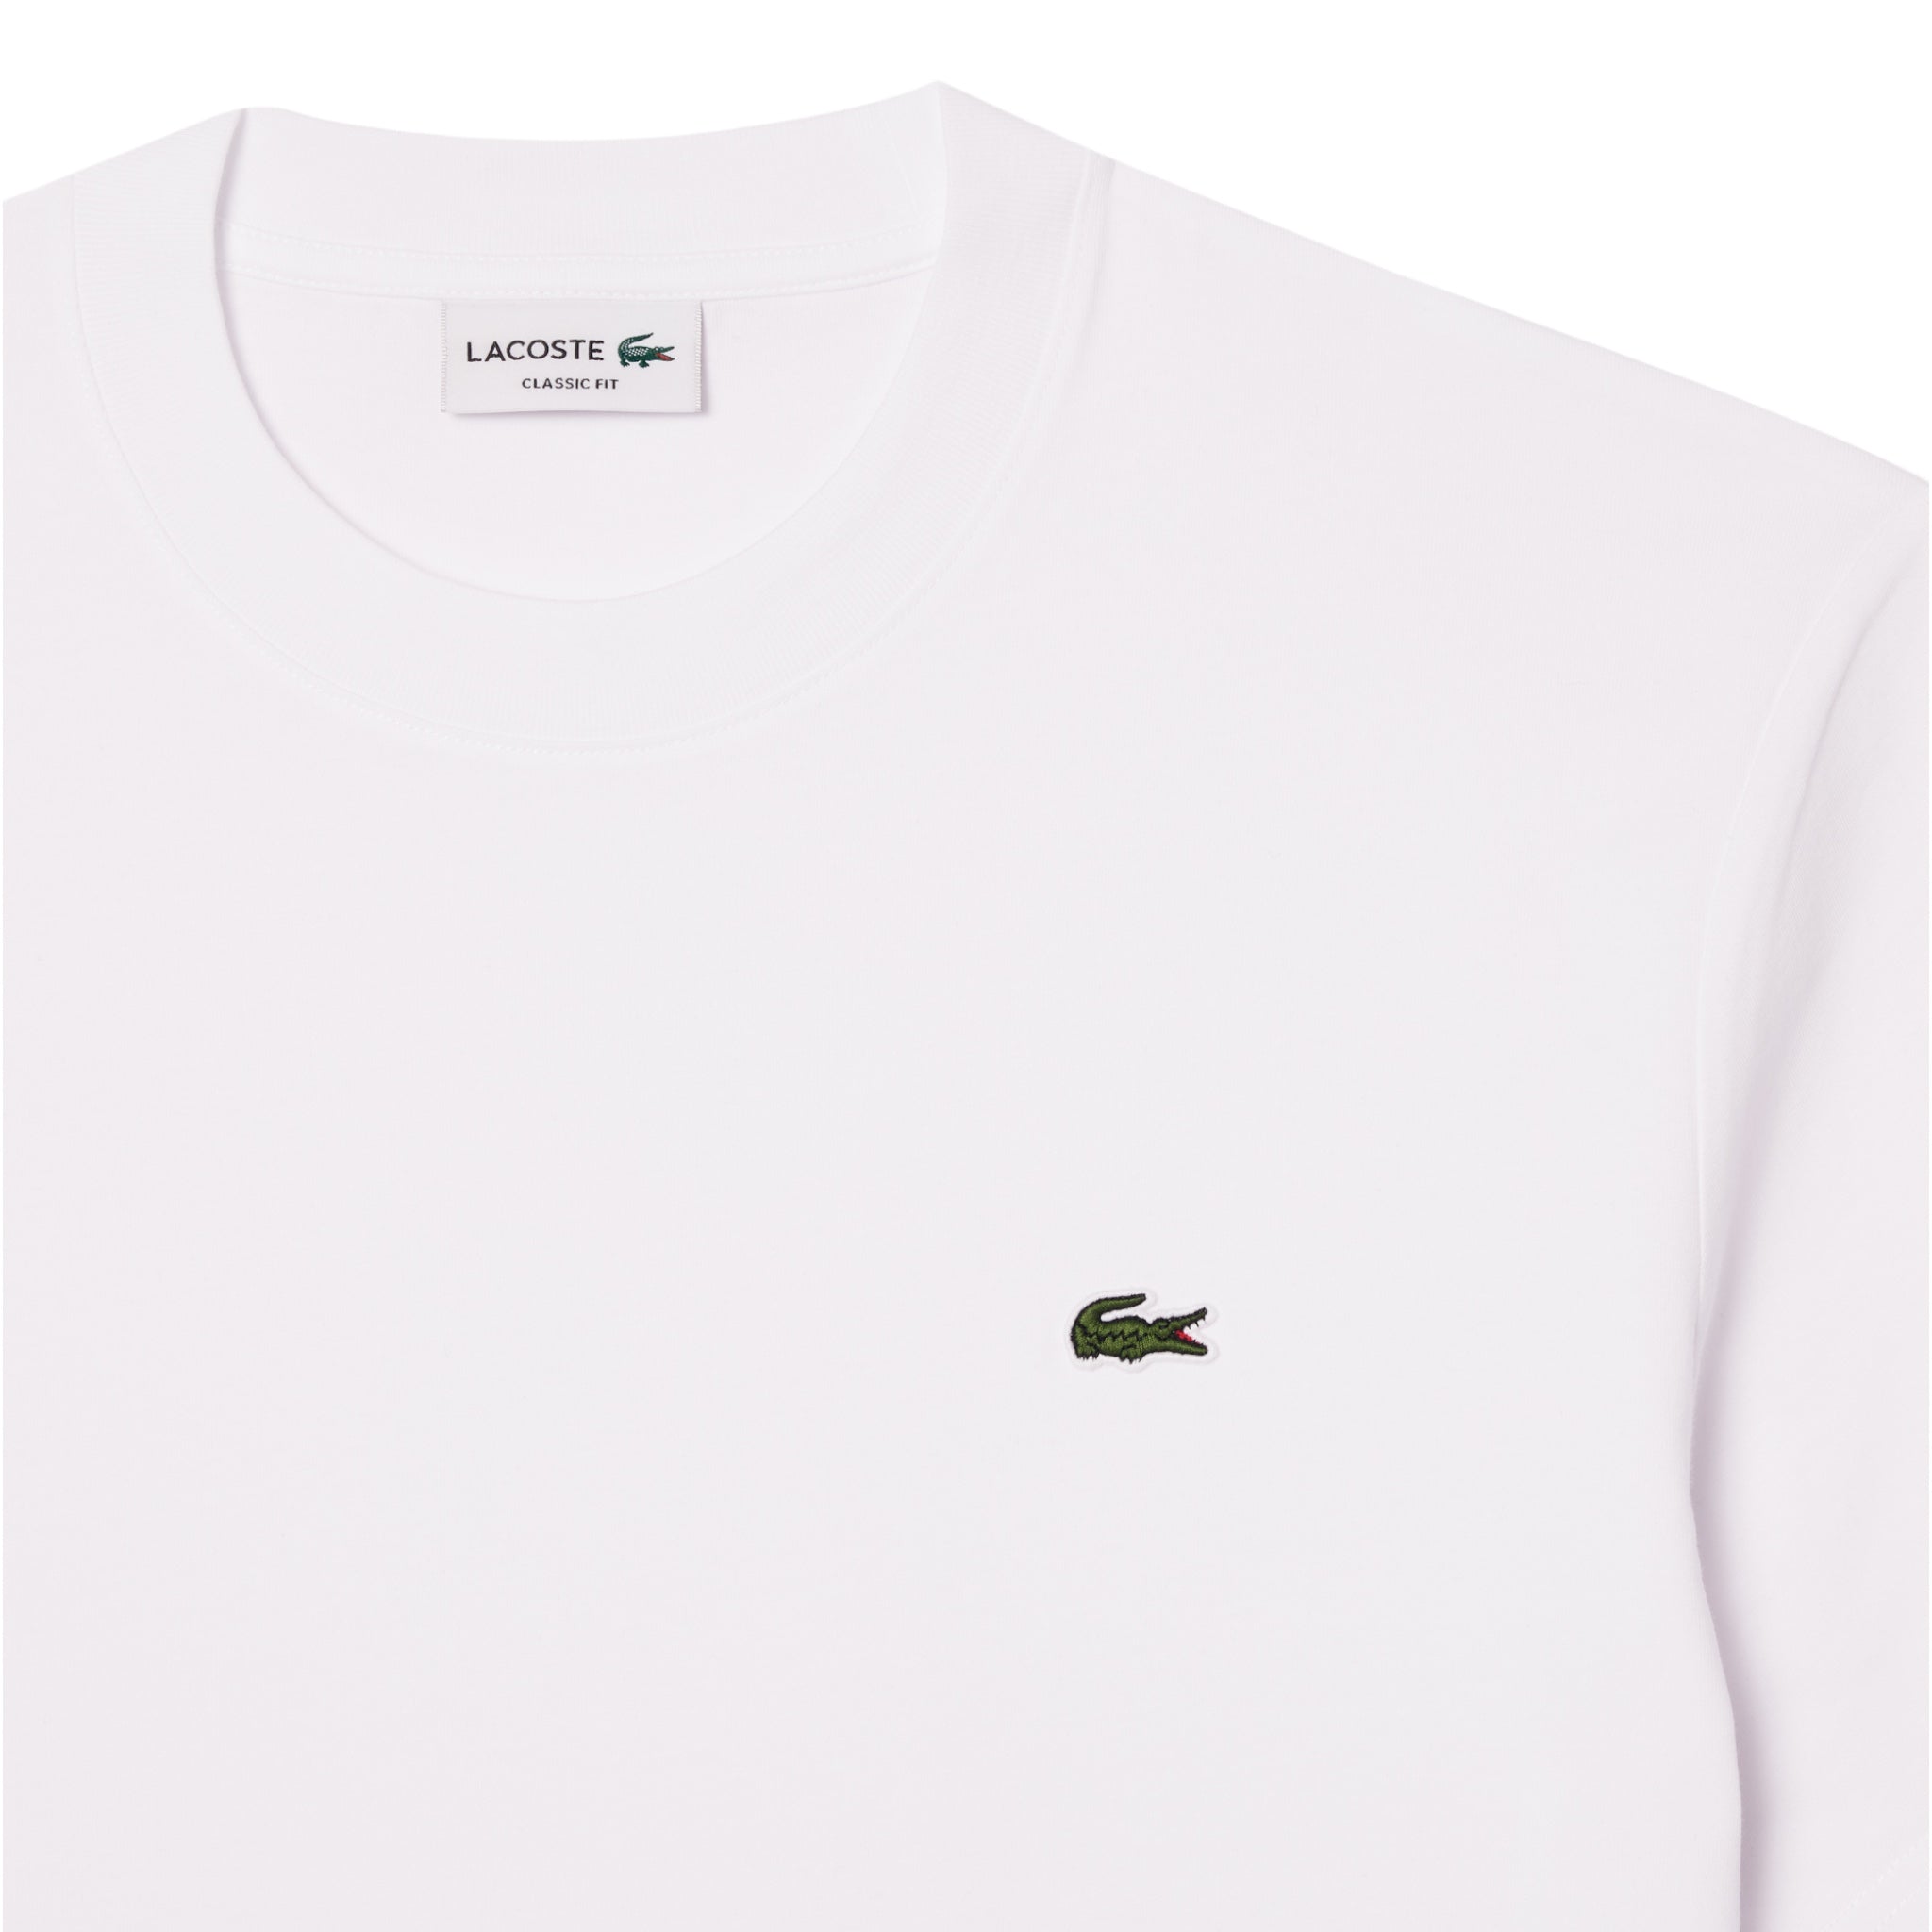 T-Shirt Classic Fit In Jersey Bianco TH731800001 Lacoste